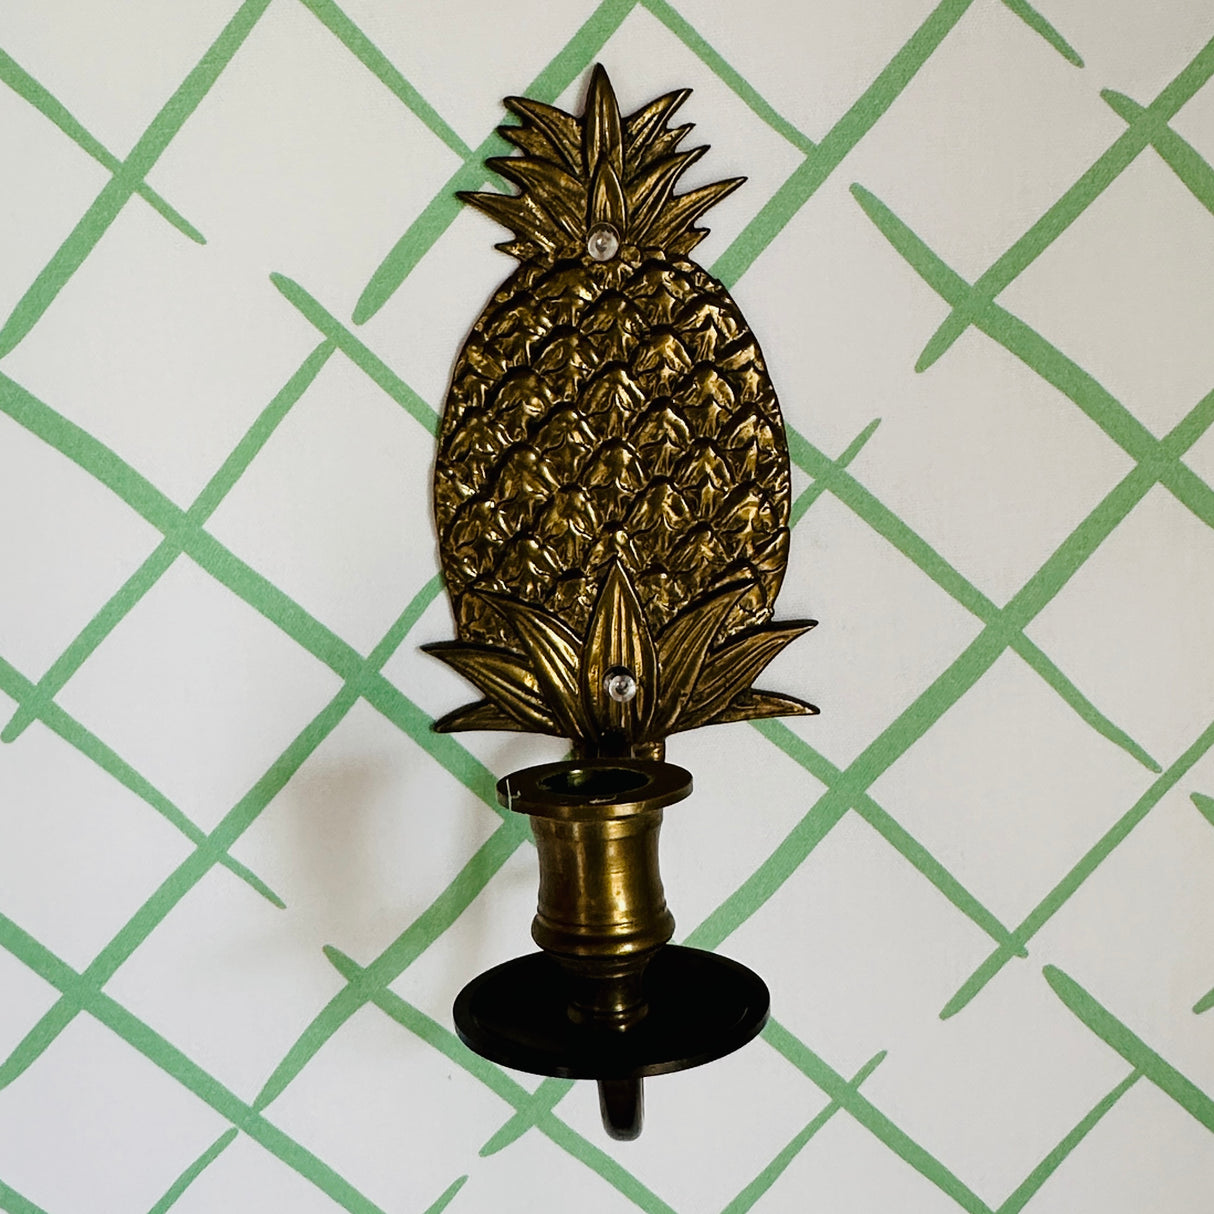 Vintage Heavy Brass Wall-Mount Pineapple Candleholders, Pair